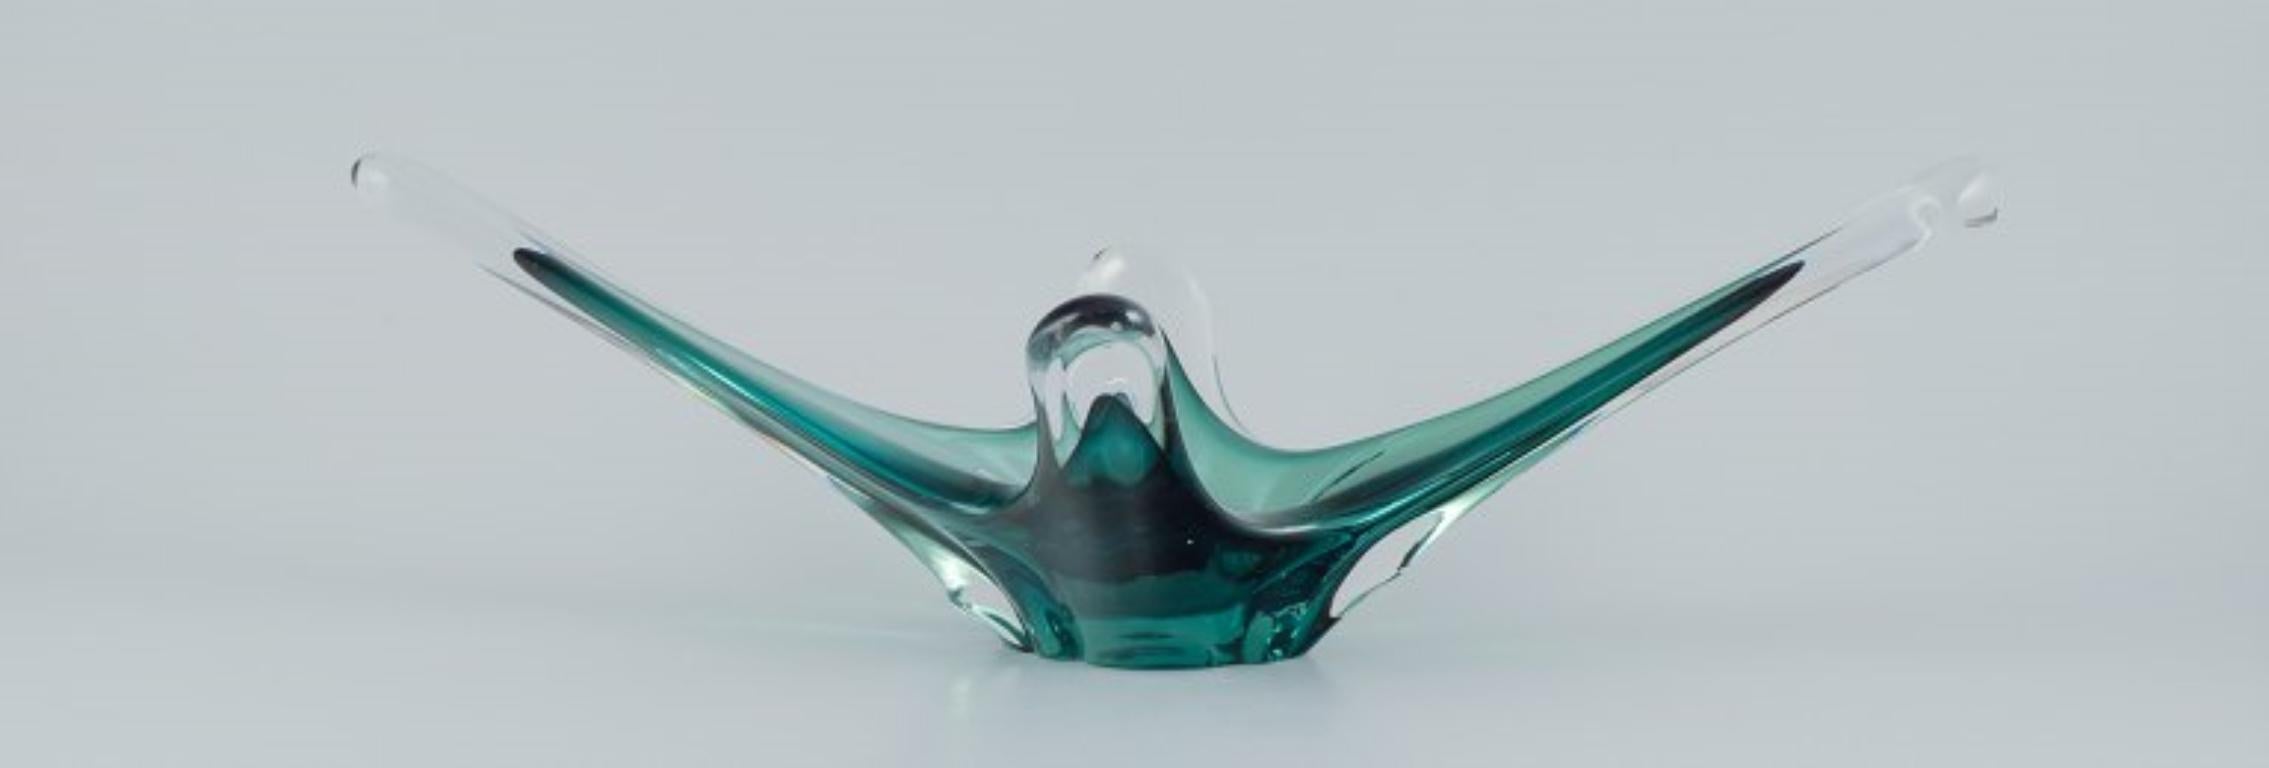 Murano, Italy. Large bowl in art glass.
Clear and green glass. Mouth-blown.
1960s/70s.
In excellent condition with some minor chips. See photos.
Dimensions: L 58.0 cm x D 27.0 cm x H 18.0 cm.